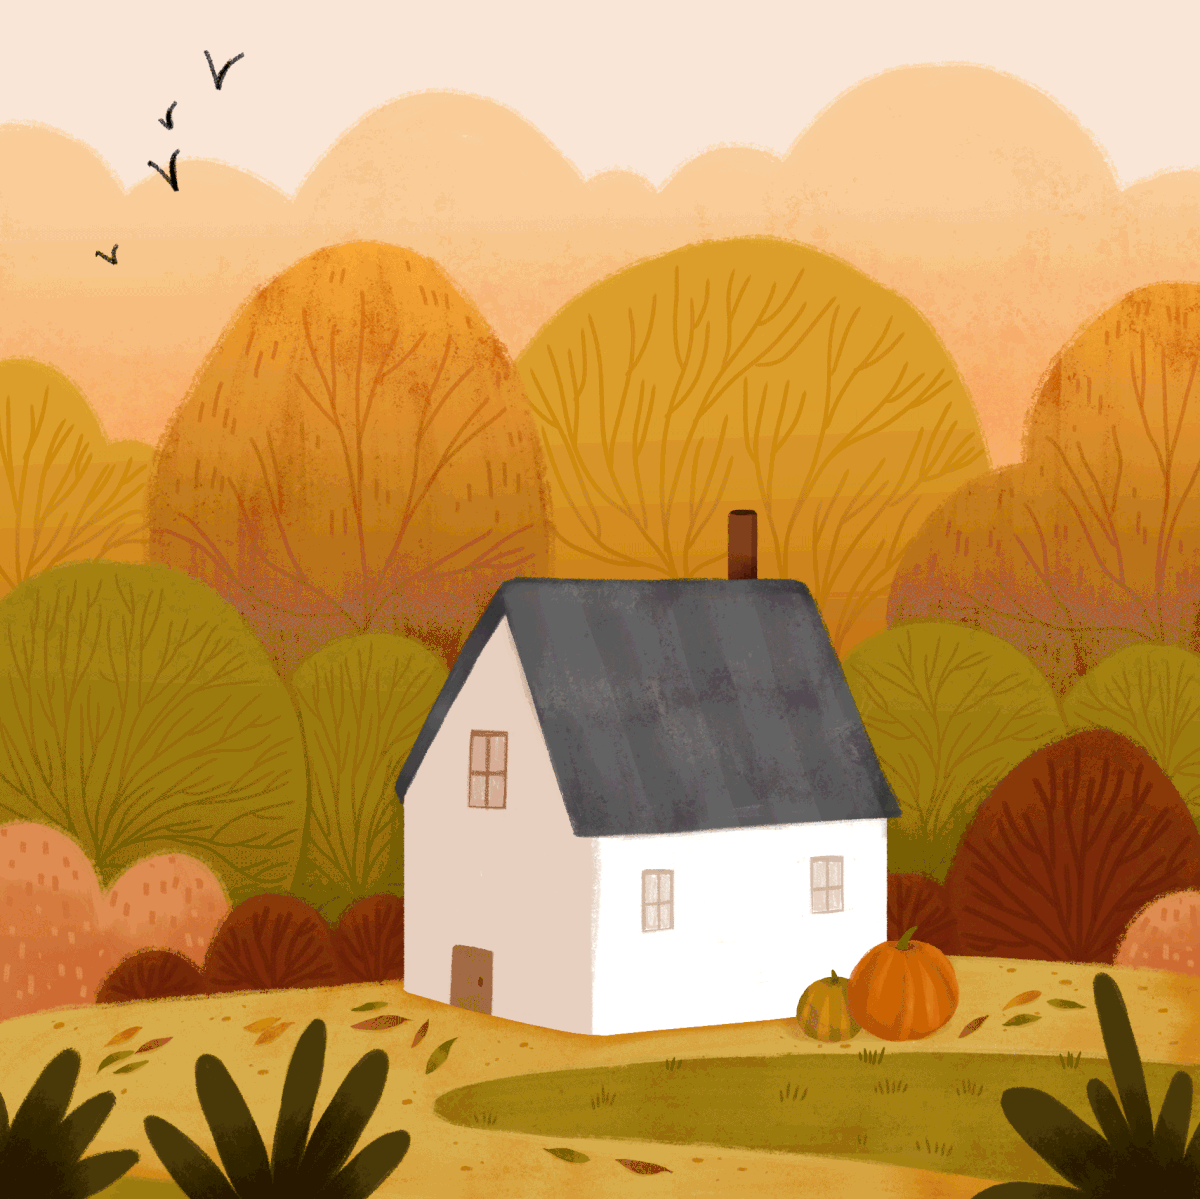 Home (illustrated Gifs) on Behance